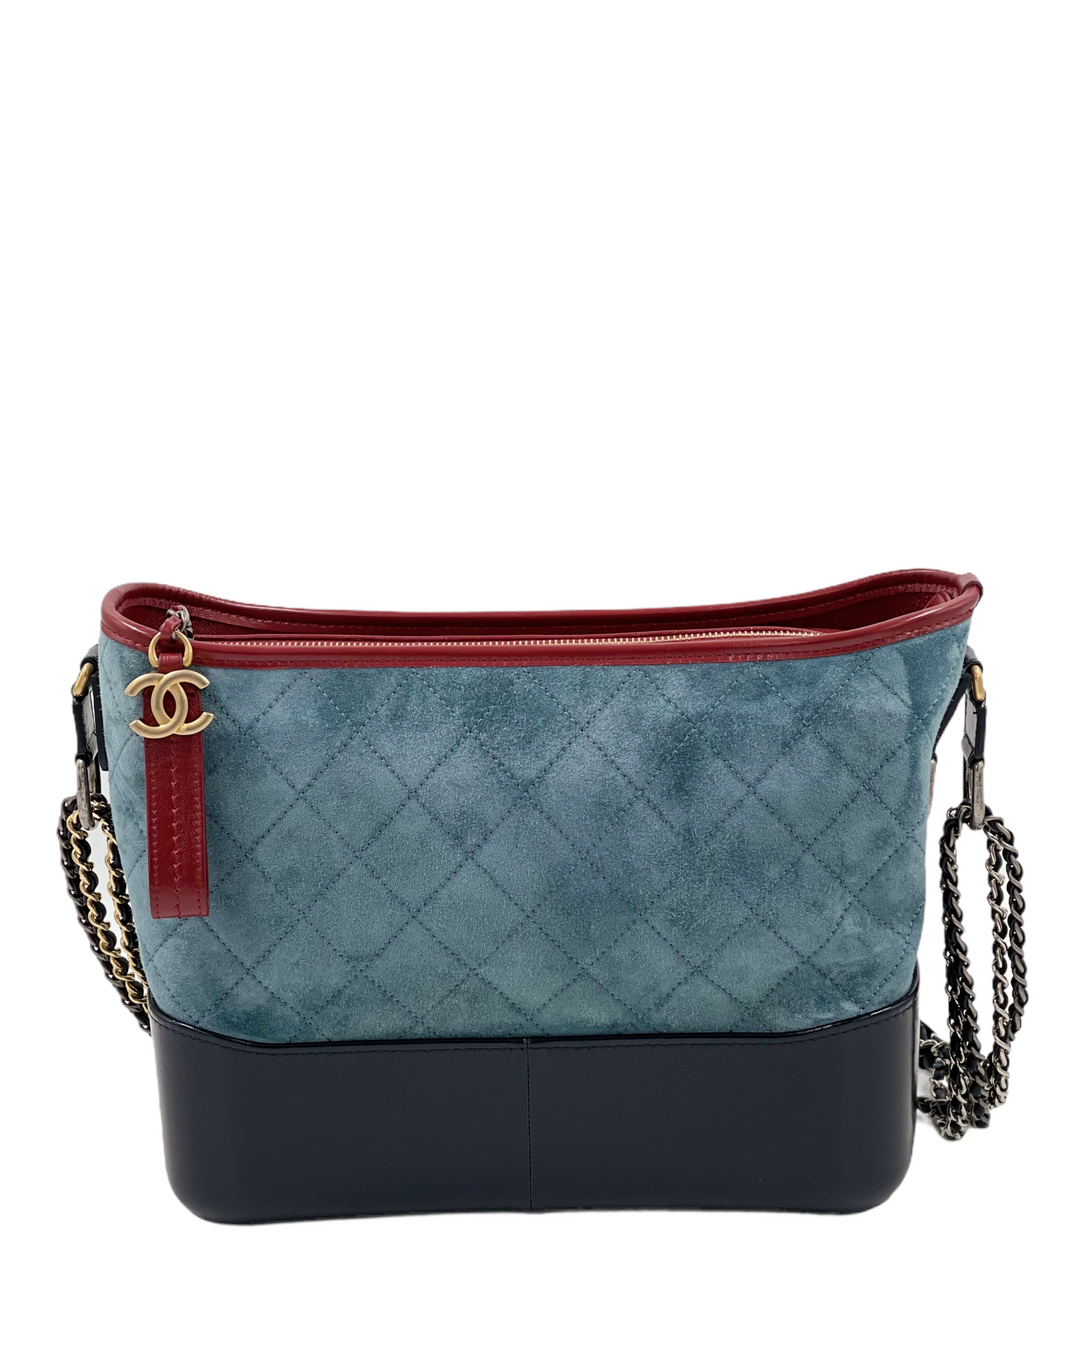 Chanel Blue Quilted Suede and Leather Medium Gabrielle Hobo Bag